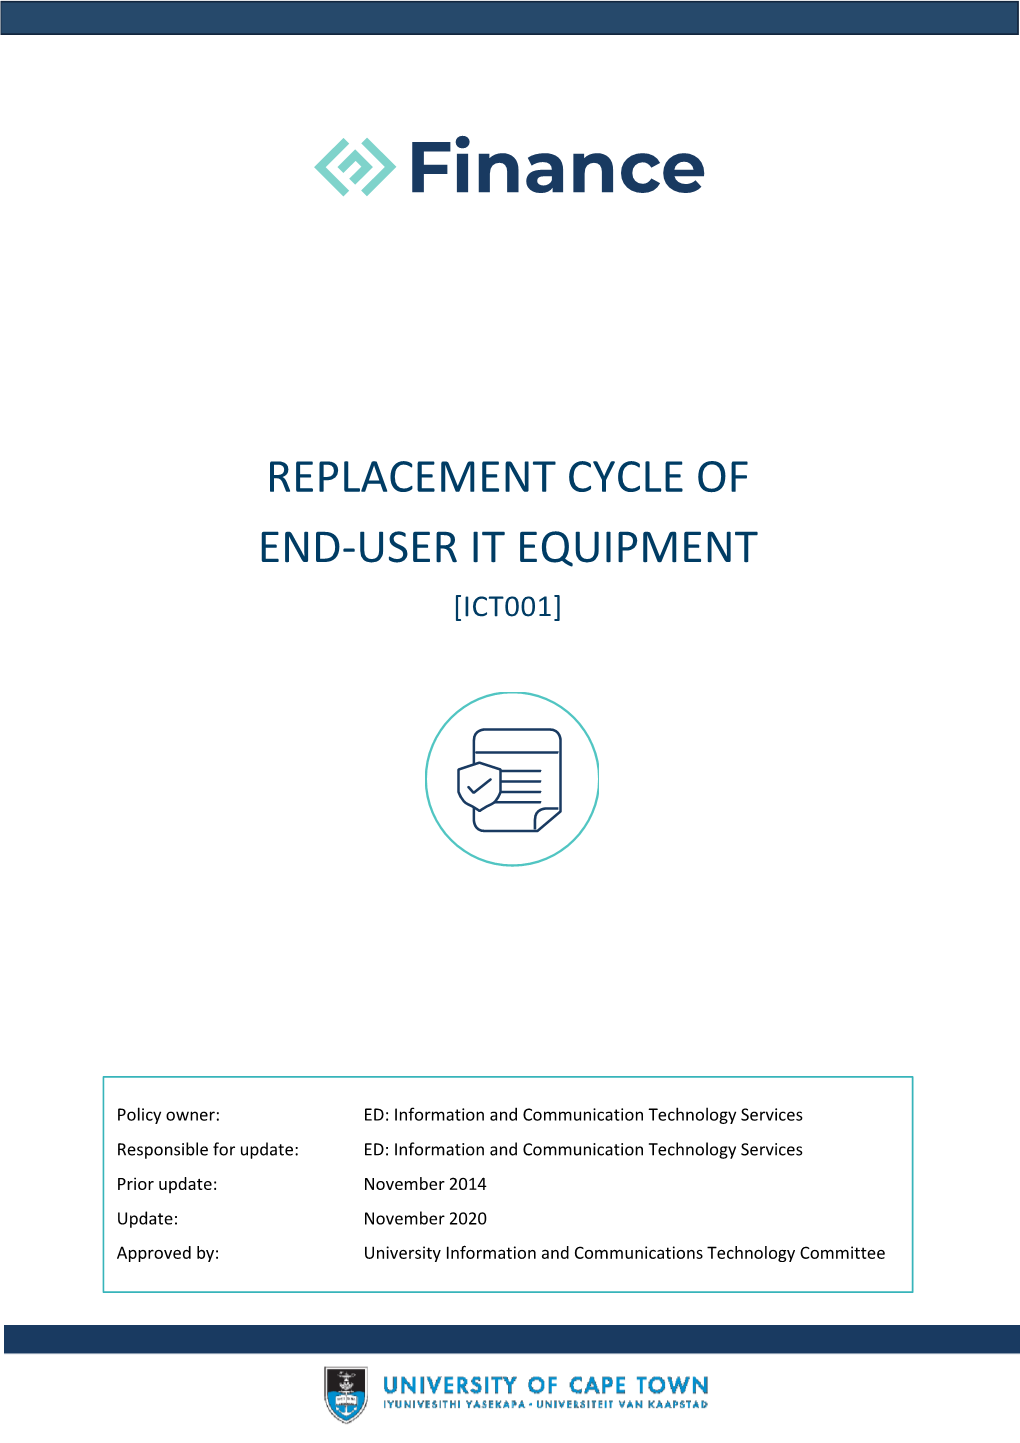 Policy on Replacement Cycle of End-User IT Equipment